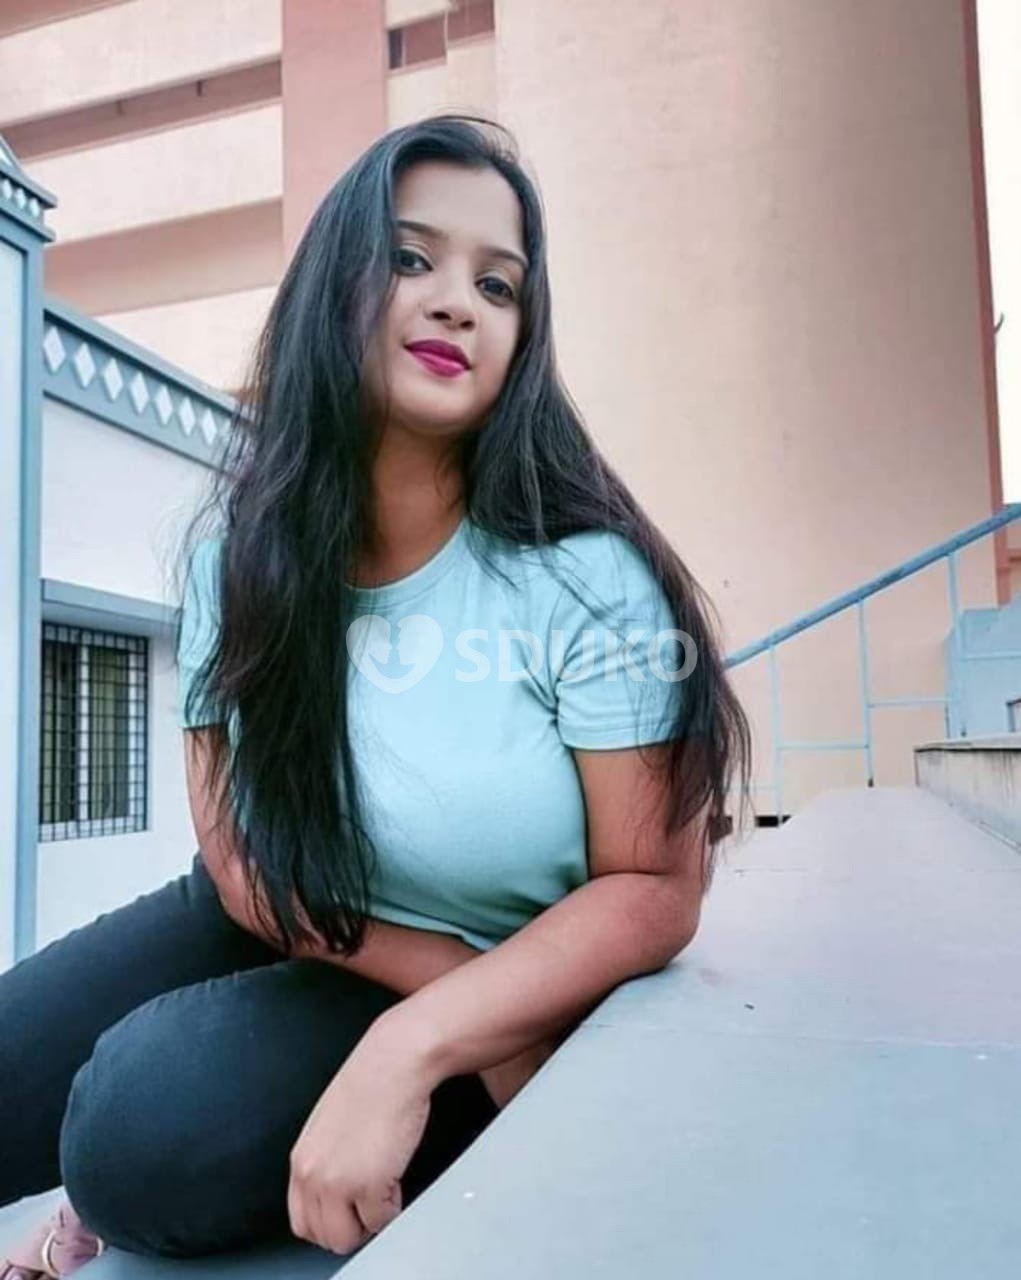 WARANGAL TOP🙋‍♀️TODAY LOW COST HIGH PROFILE INDEPENDENT CALL GIRL SERVICE AVAILABLE 24 HOURS AVAILABLE HOME AND